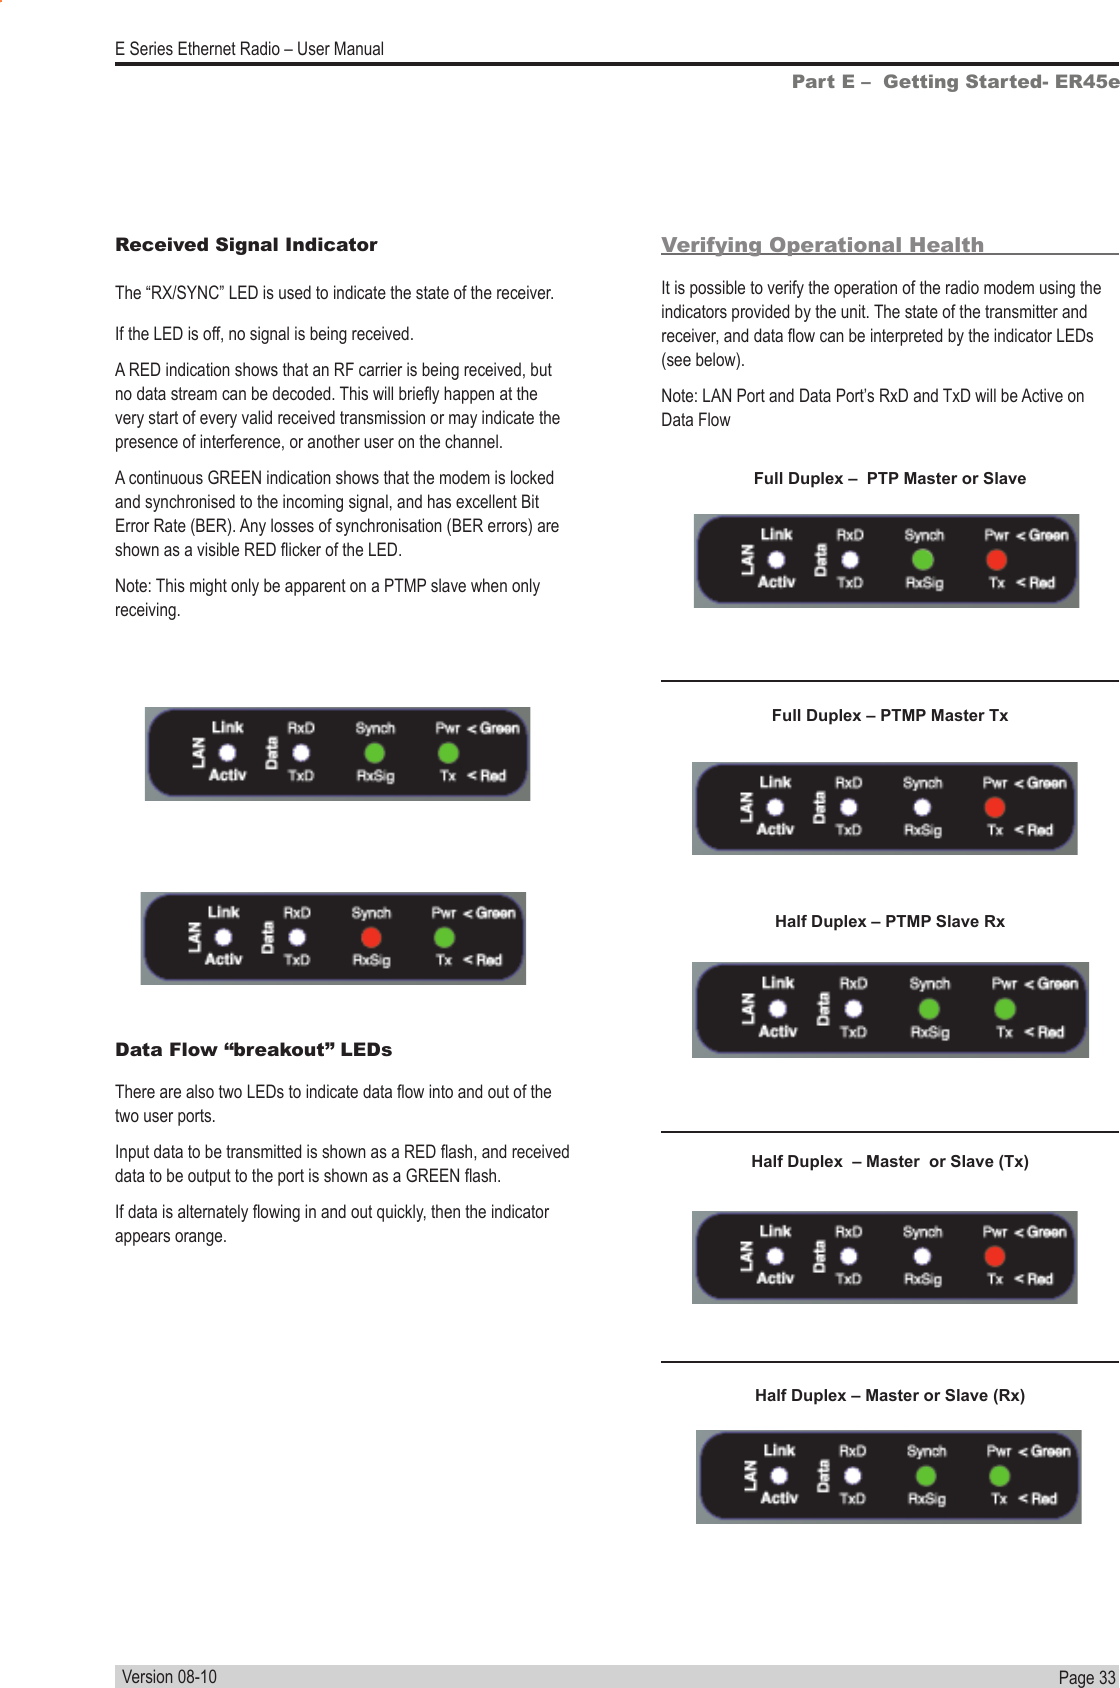 Page  33  E Series Ethernet Radio – User ManualVersion 08-10Part E –  Getting Started- ER45eReceived Signal IndicatorThe “RX/SYNC” LED is used to indicate the state of the receiver.  If the LED is off, no signal is being received.A RED indication shows that an RF carrier is being received, but no data stream can be decoded. This will briey happen at the very start of every valid received transmission or may indicate the presence of interference, or another user on the channel.A continuous GREEN indication shows that the modem is locked and synchronised to the incoming signal, and has excellent Bit Error Rate (BER). Any losses of synchronisation (BER errors) are shown as a visible RED icker of the LED. Note: This might only be apparent on a PTMP slave when only receiving.Verifying Operational HealthIt is possible to verify the operation of the radio modem using the indicators provided by the unit. The state of the transmitter and receiver, and data ow can be interpreted by the indicator LEDs (see below).Note: LAN Port and Data Port’s RxD and TxD will be Active on Data FlowData Flow “breakout” LEDsThere are also two LEDs to indicate data ow into and out of the two user ports.Input data to be transmitted is shown as a RED ash, and received data to be output to the port is shown as a GREEN ash.If data is alternately owing in and out quickly, then the indicator appears orange.Full Duplex – PTMP Master TxHalf Duplex  – Master  or Slave (Tx)Half Duplex – PTMP Slave RxHalf Duplex – Master or Slave (Rx)Full Duplex –  PTP Master or Slave